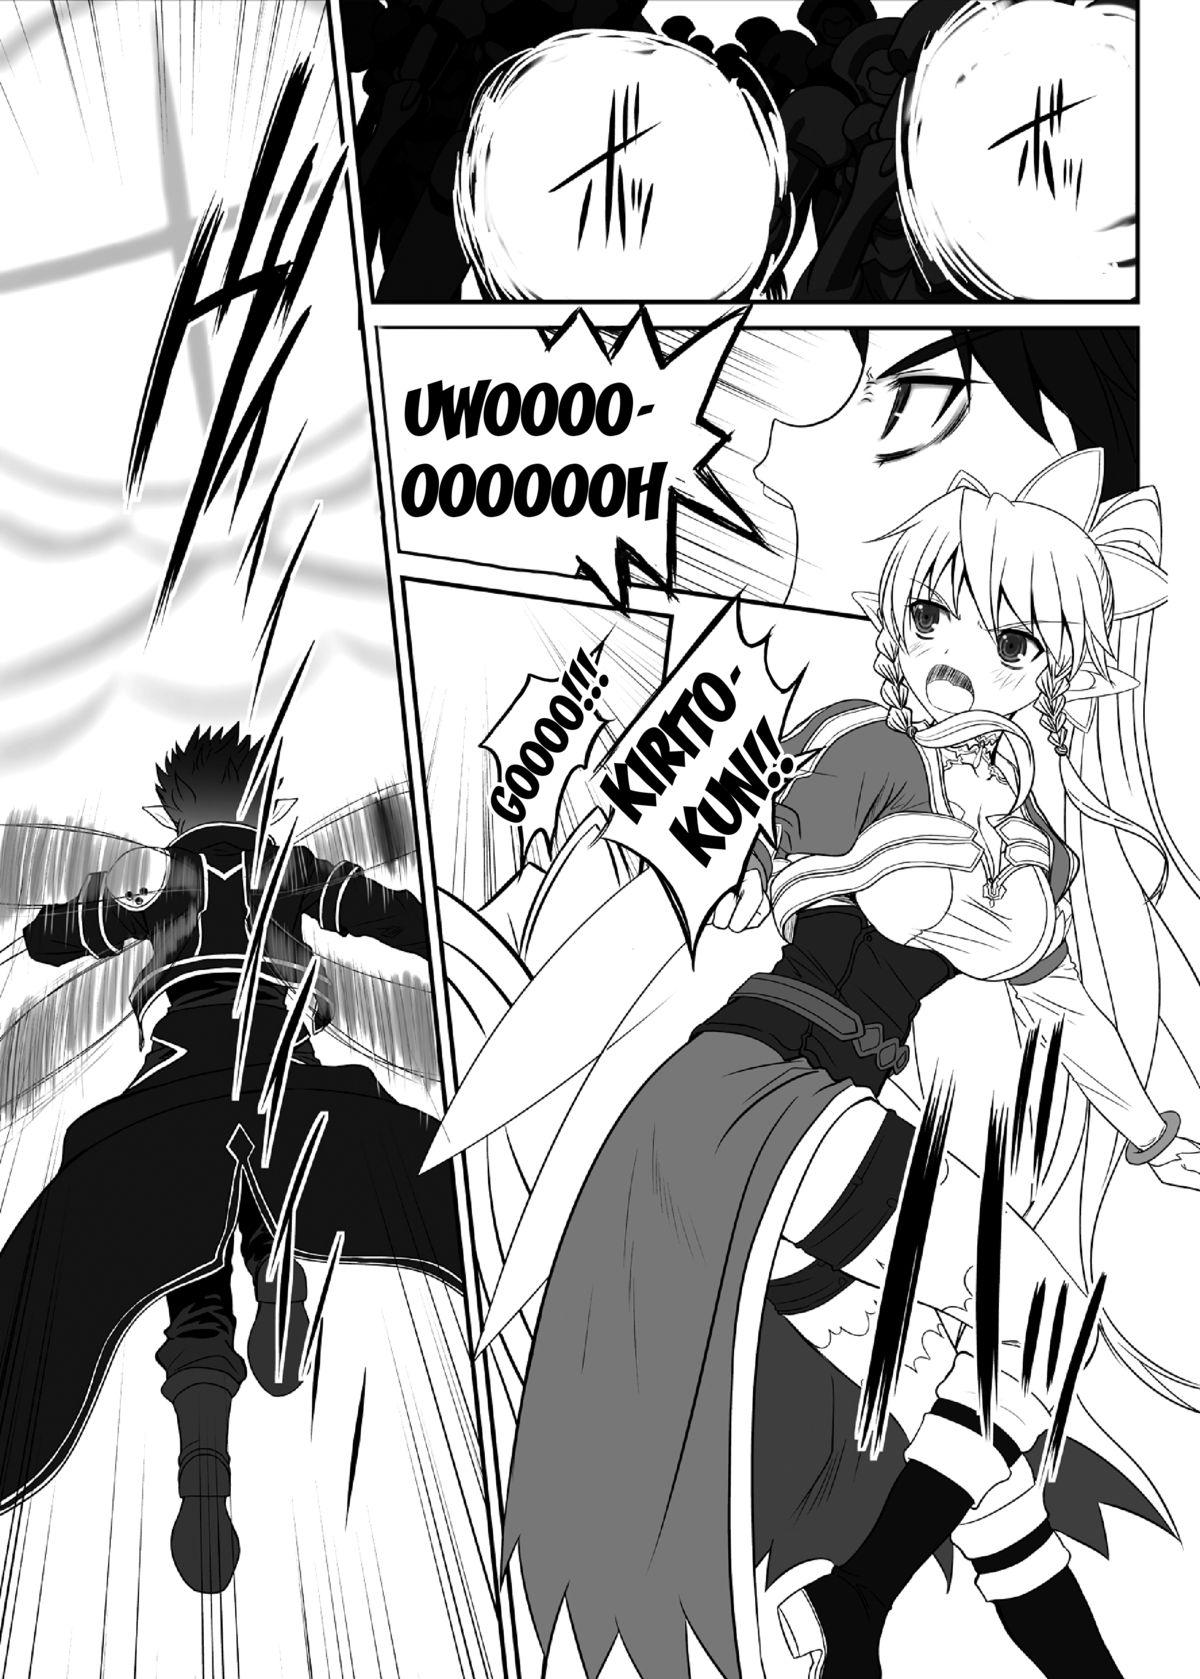 Awesome Slave Asuna On-Demand 2 - Sword art online Dick Suckers - Page 4